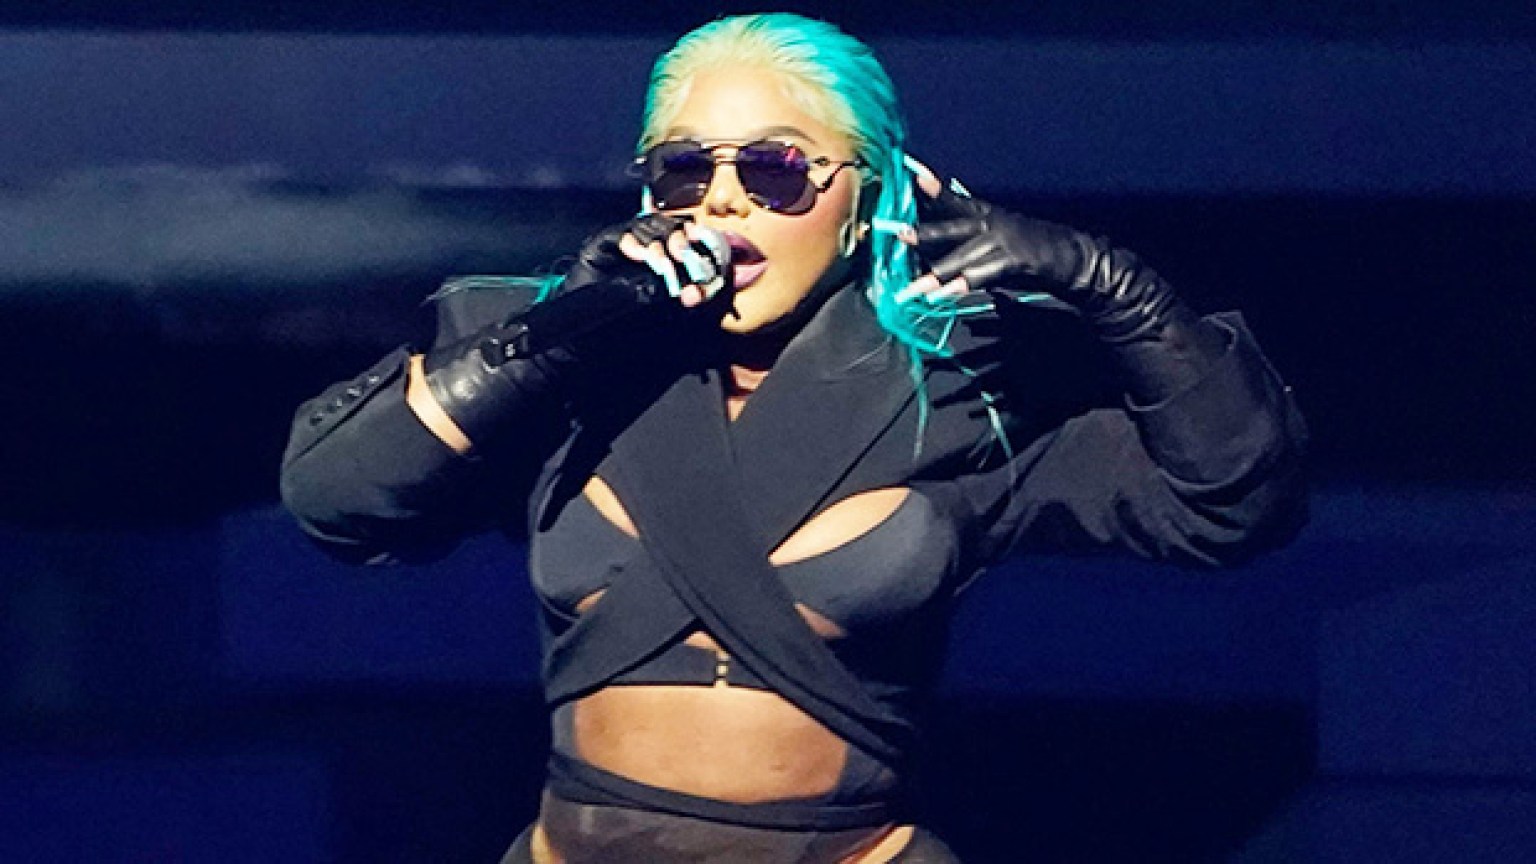 Lil’ Kim At BET Awards 2022 Photos Of Her Outfit & Performance